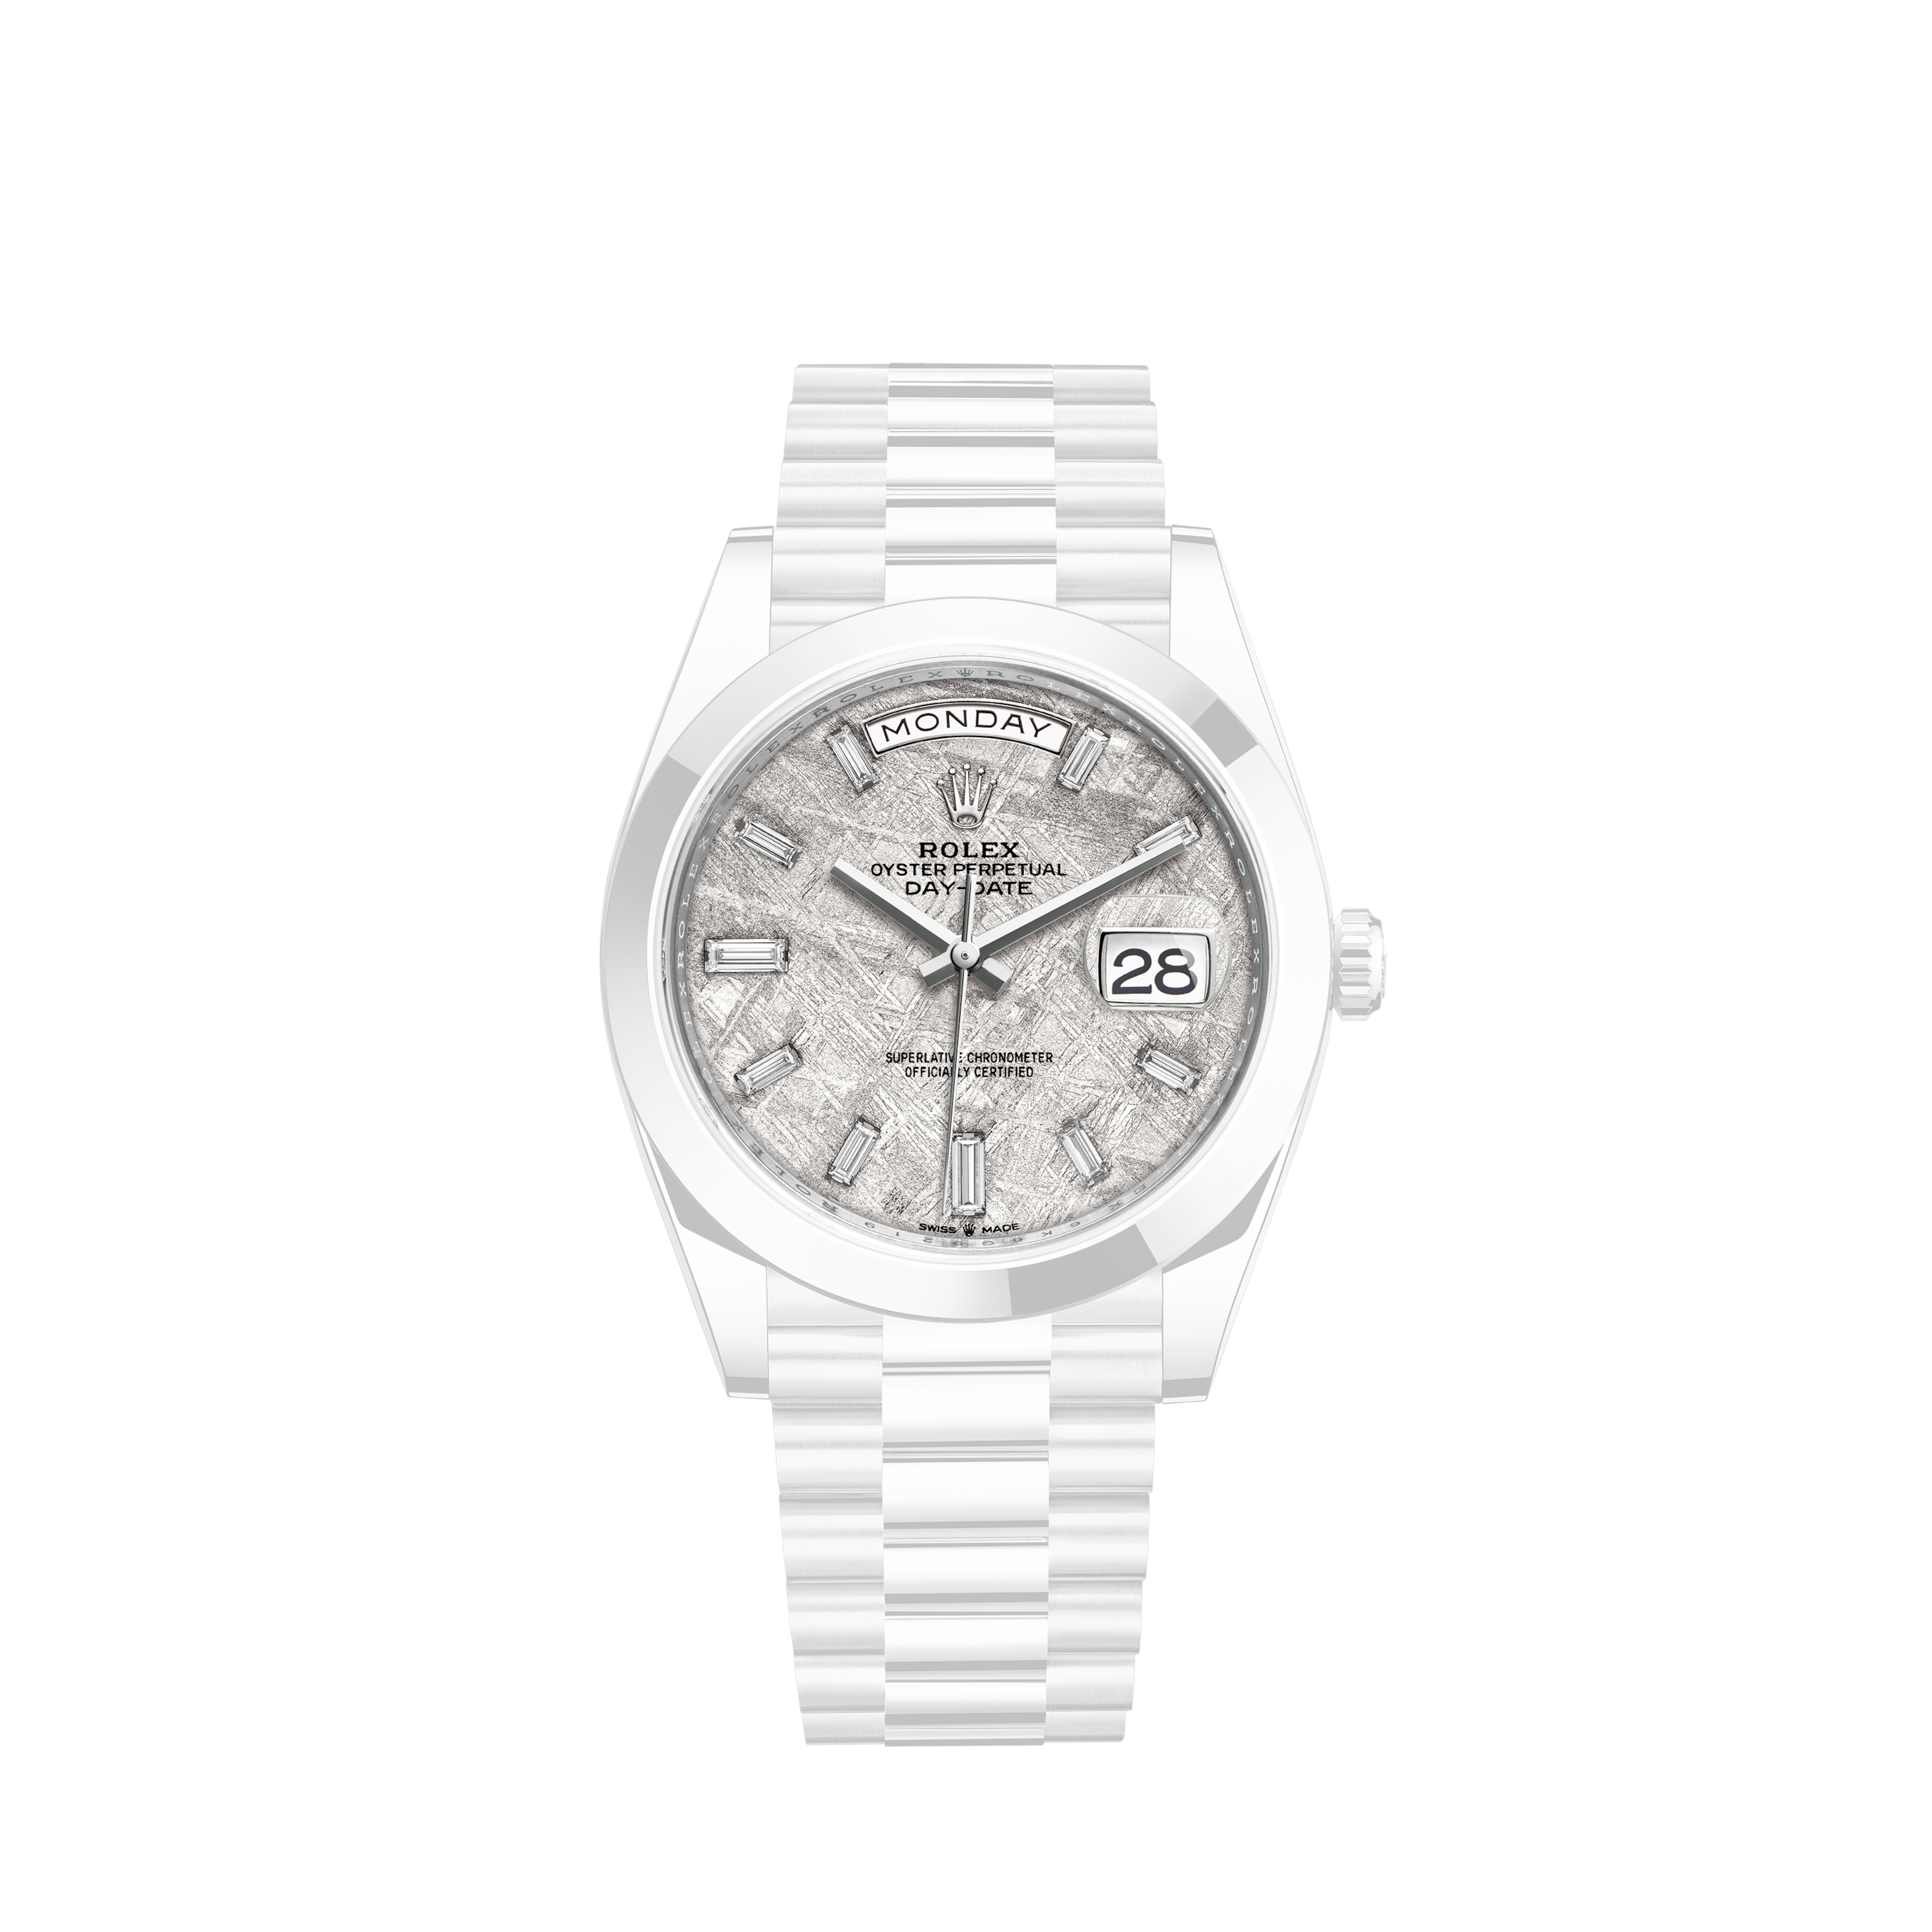 Rolex 126200 Datejust 36mm Stainless Steel Domed Smooth Bezel White Roman Dial Oyster Bracelet